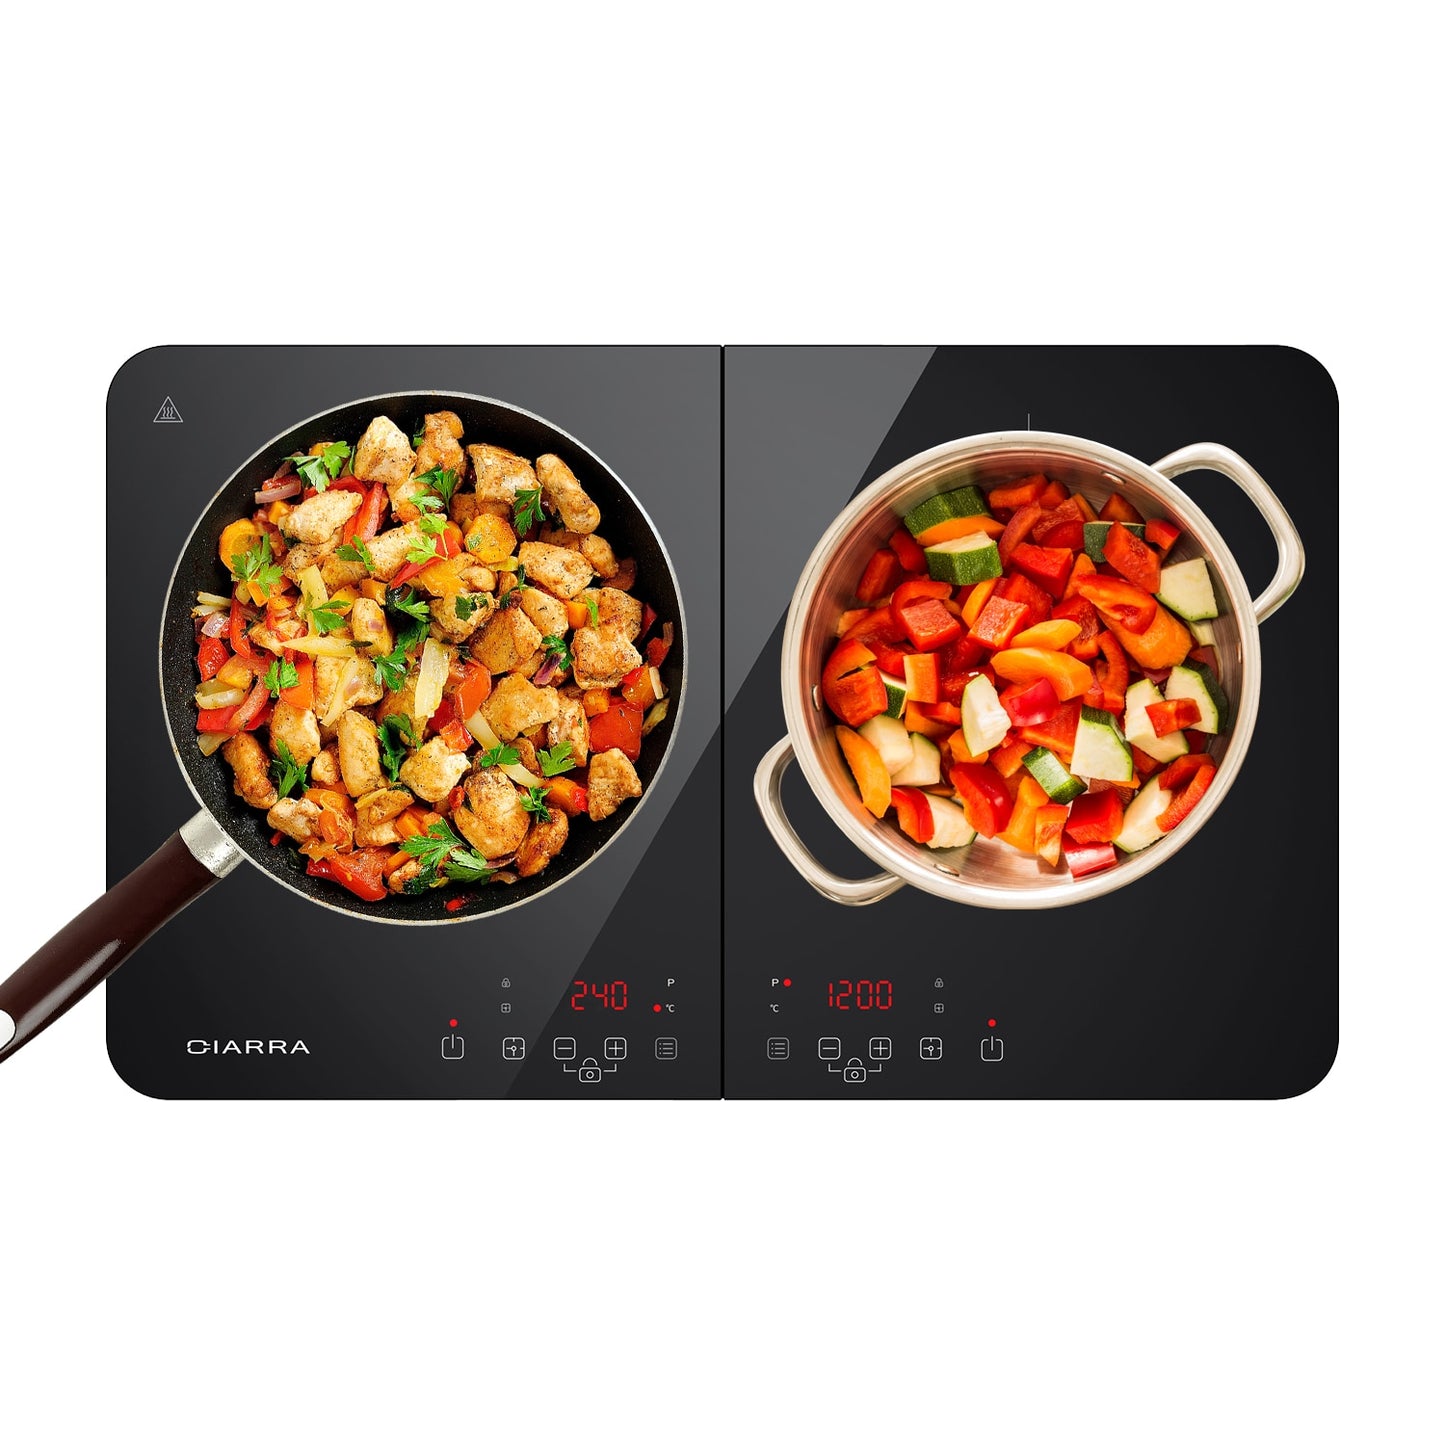 CIARRA CBTIH2 Induction Hob 3500W, Double Induction Cooker with Sensor Touch Control 10 Temperature Levels Multiple Power Level